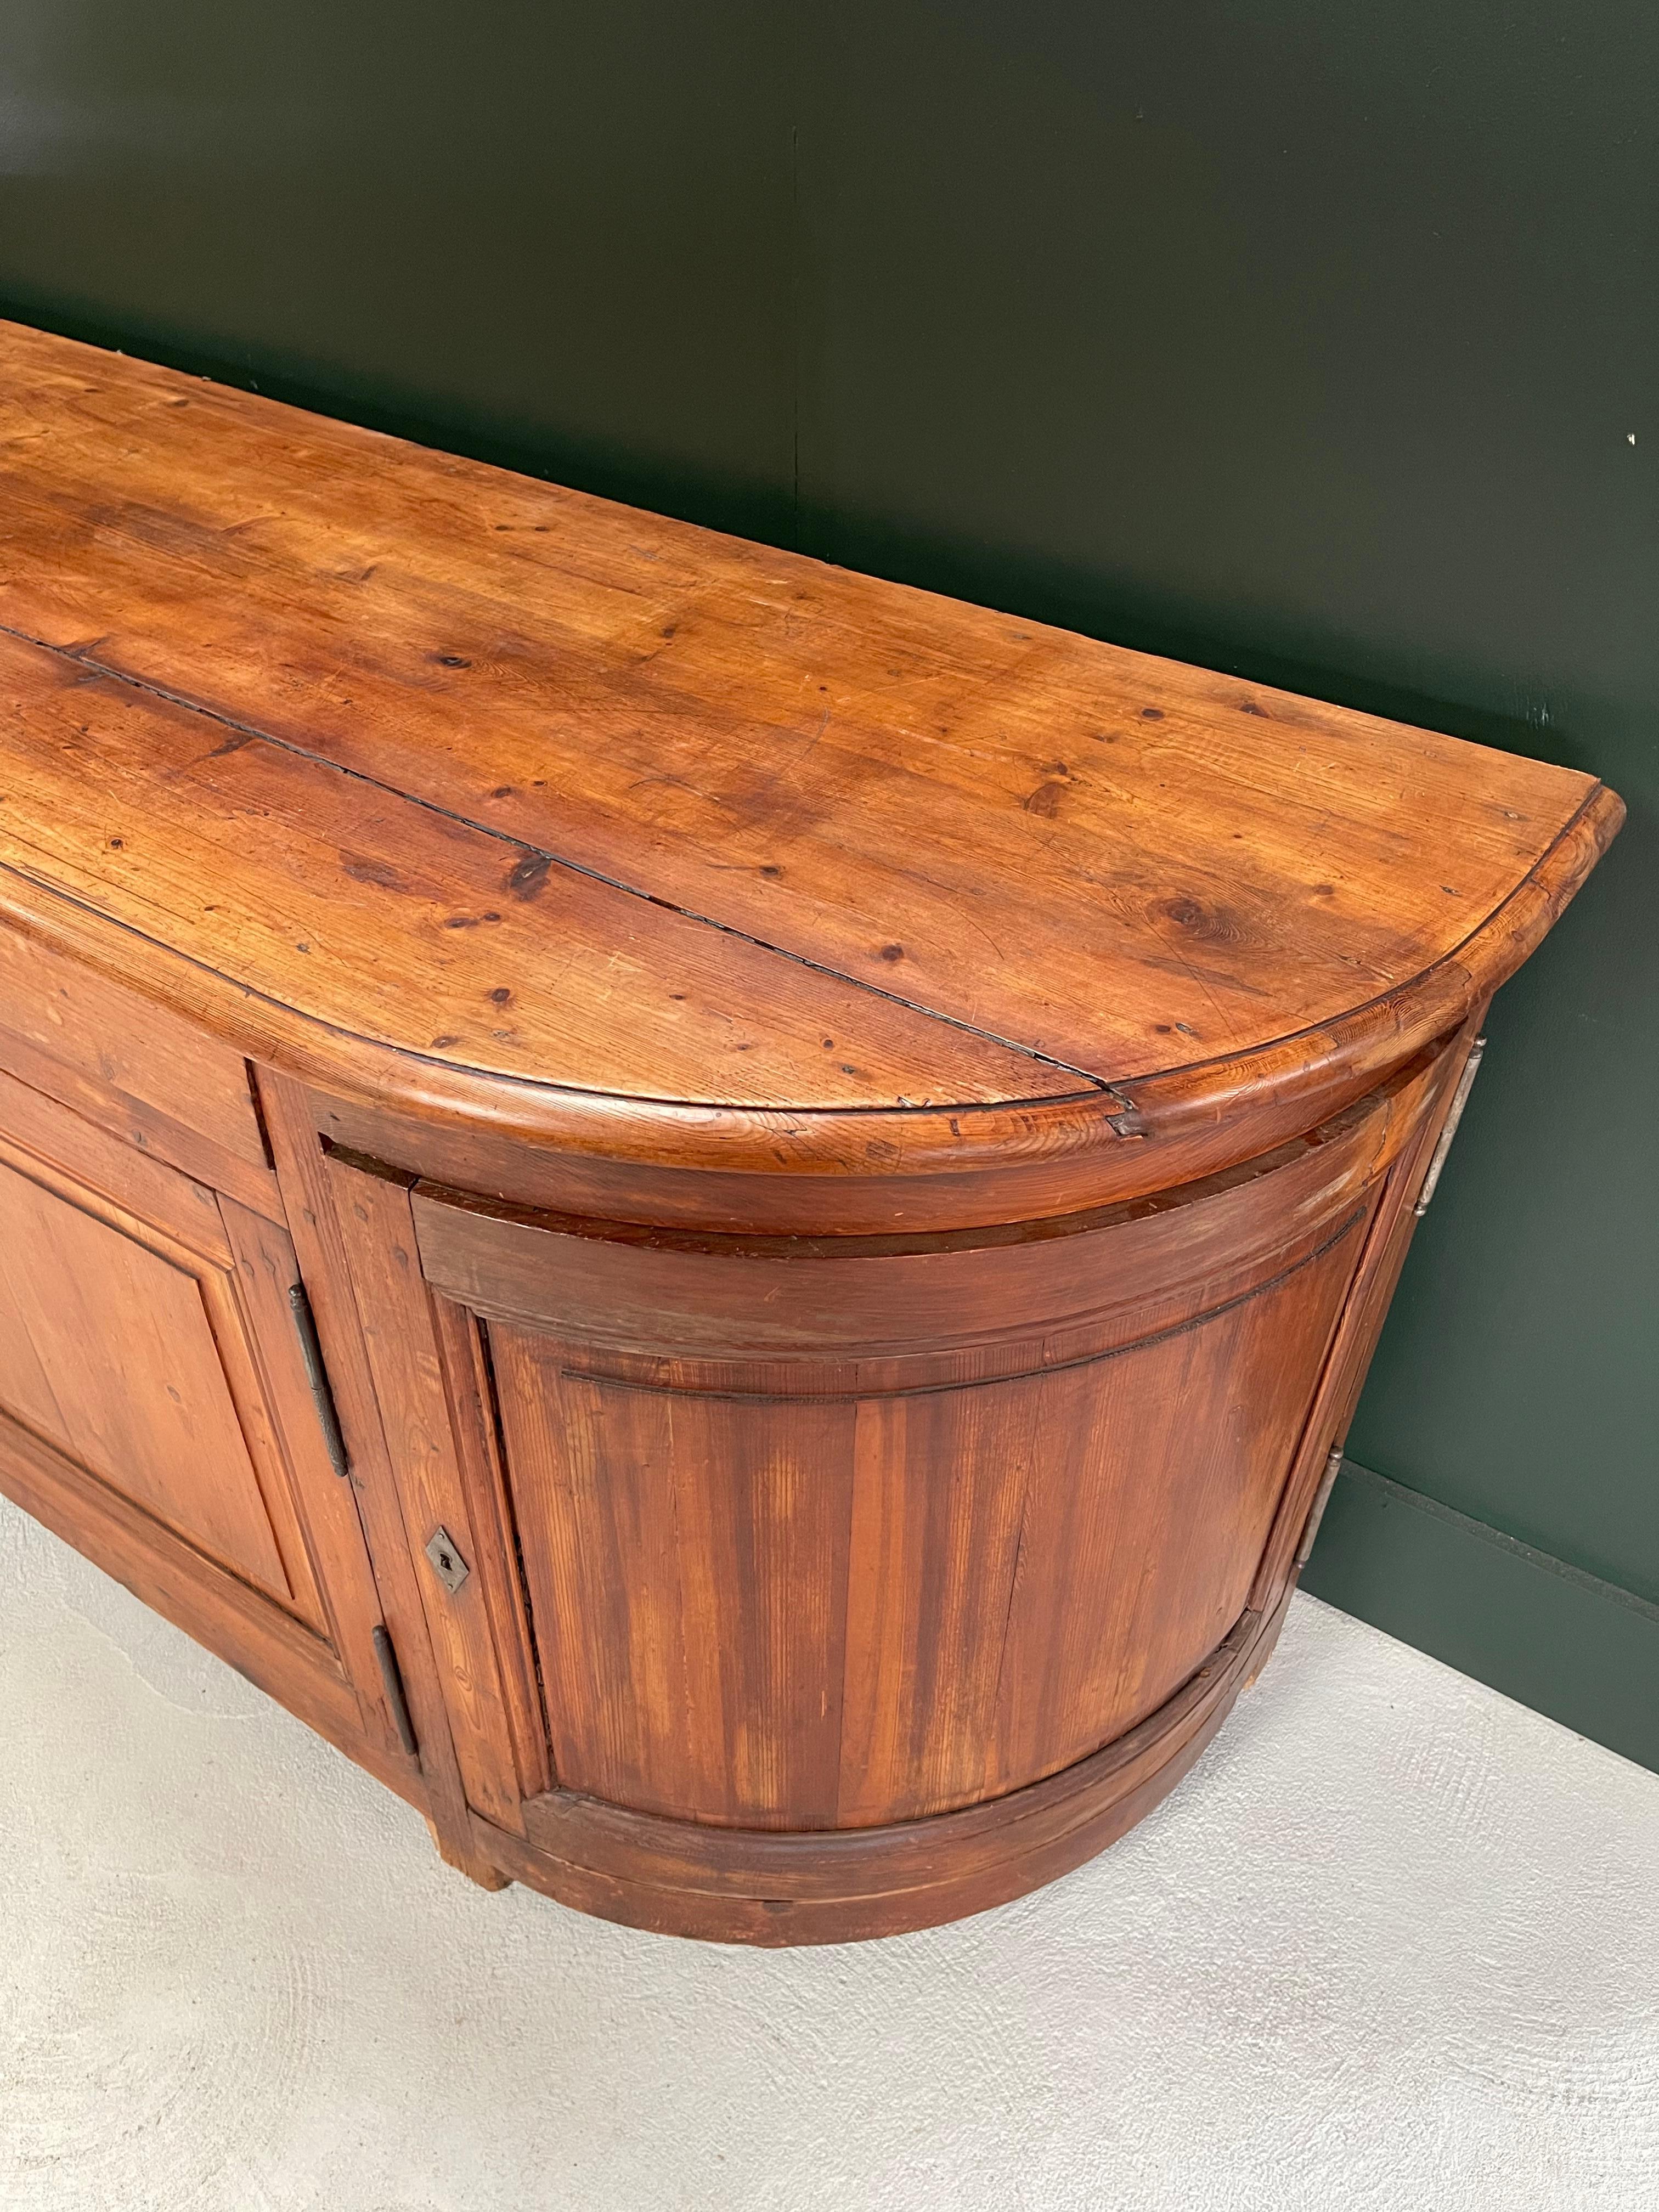 Embrace the allure of curves and timeless French craftsmanship with our Mid 19th-century French Savoyard Curved Sideboard made of pitch pine. From the picturesque region of Savoy, renowned for its artistry, this piece piece marries the refined